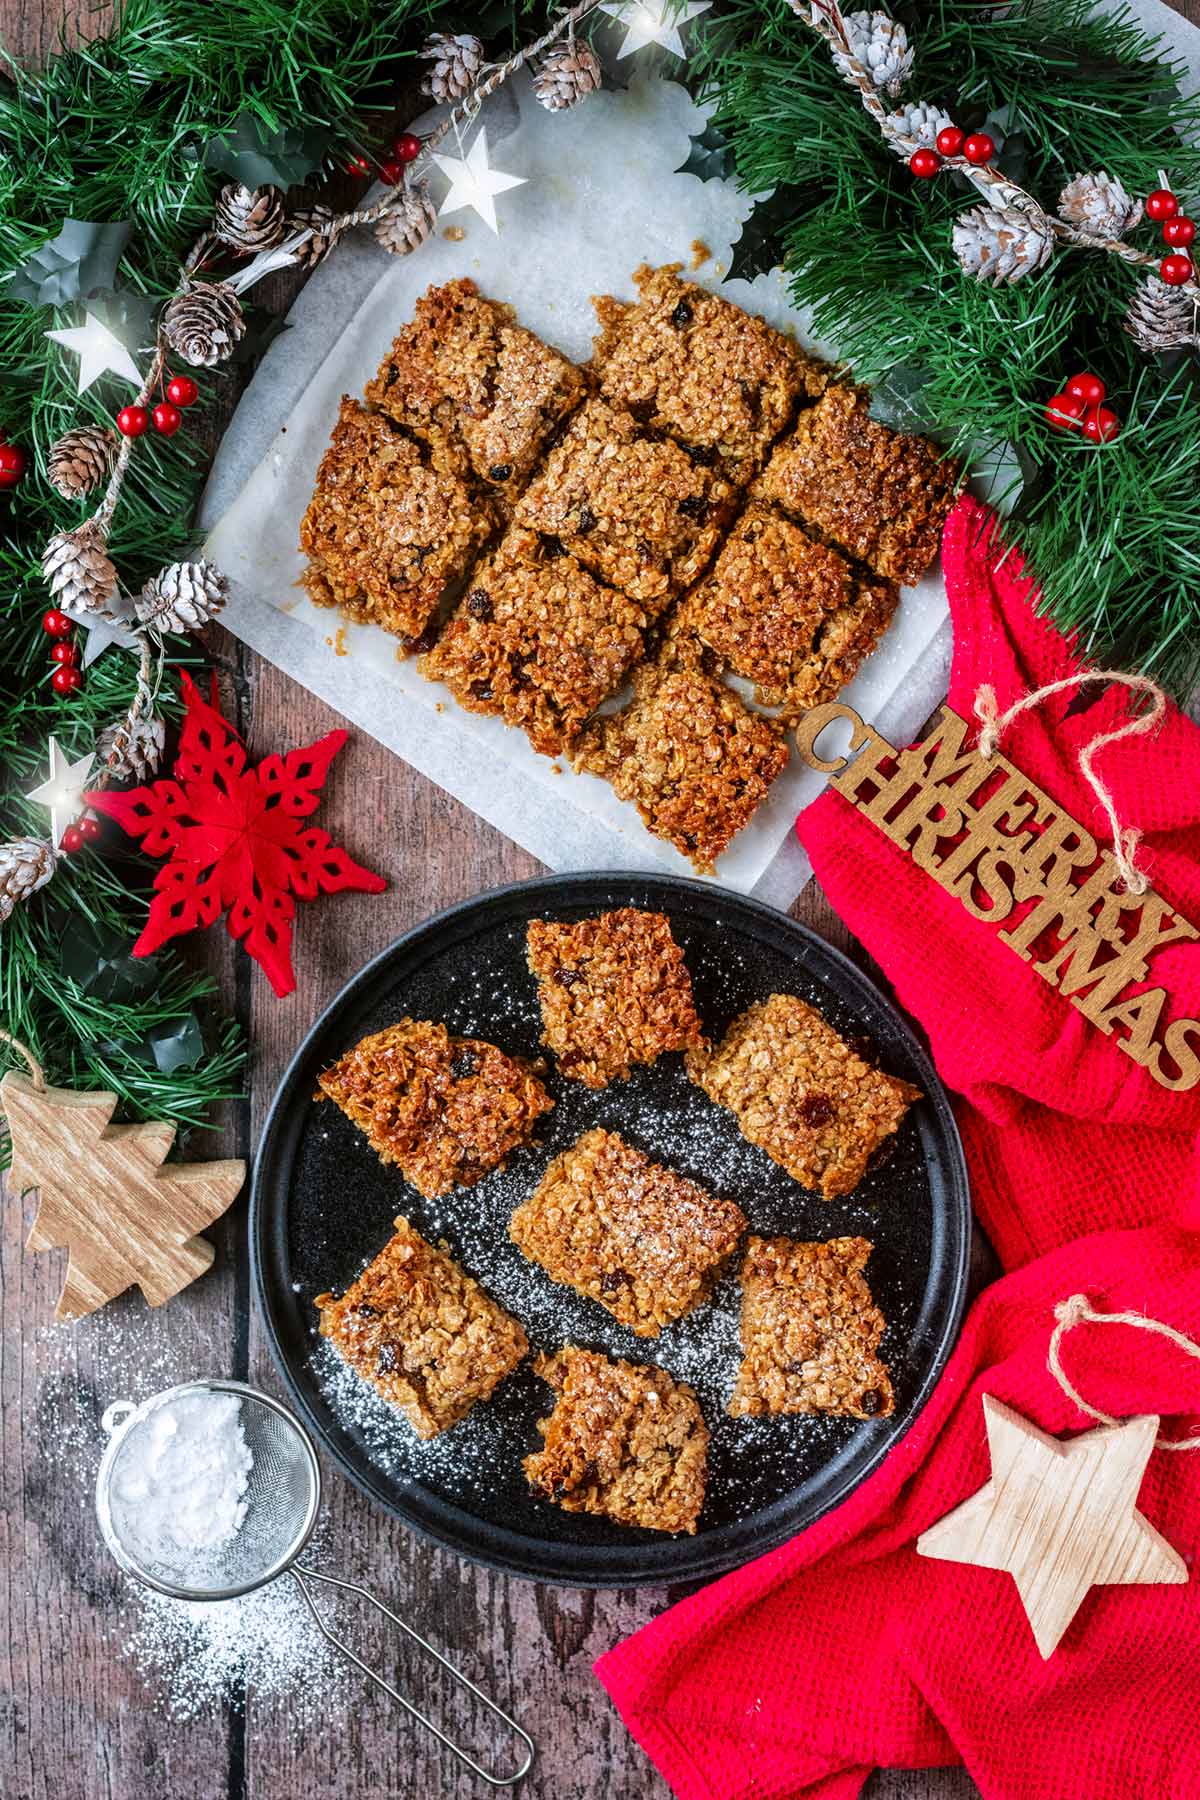 A plate of flapjacks next to flapjacks on some baking paper all surrounded by Christmas decorations.